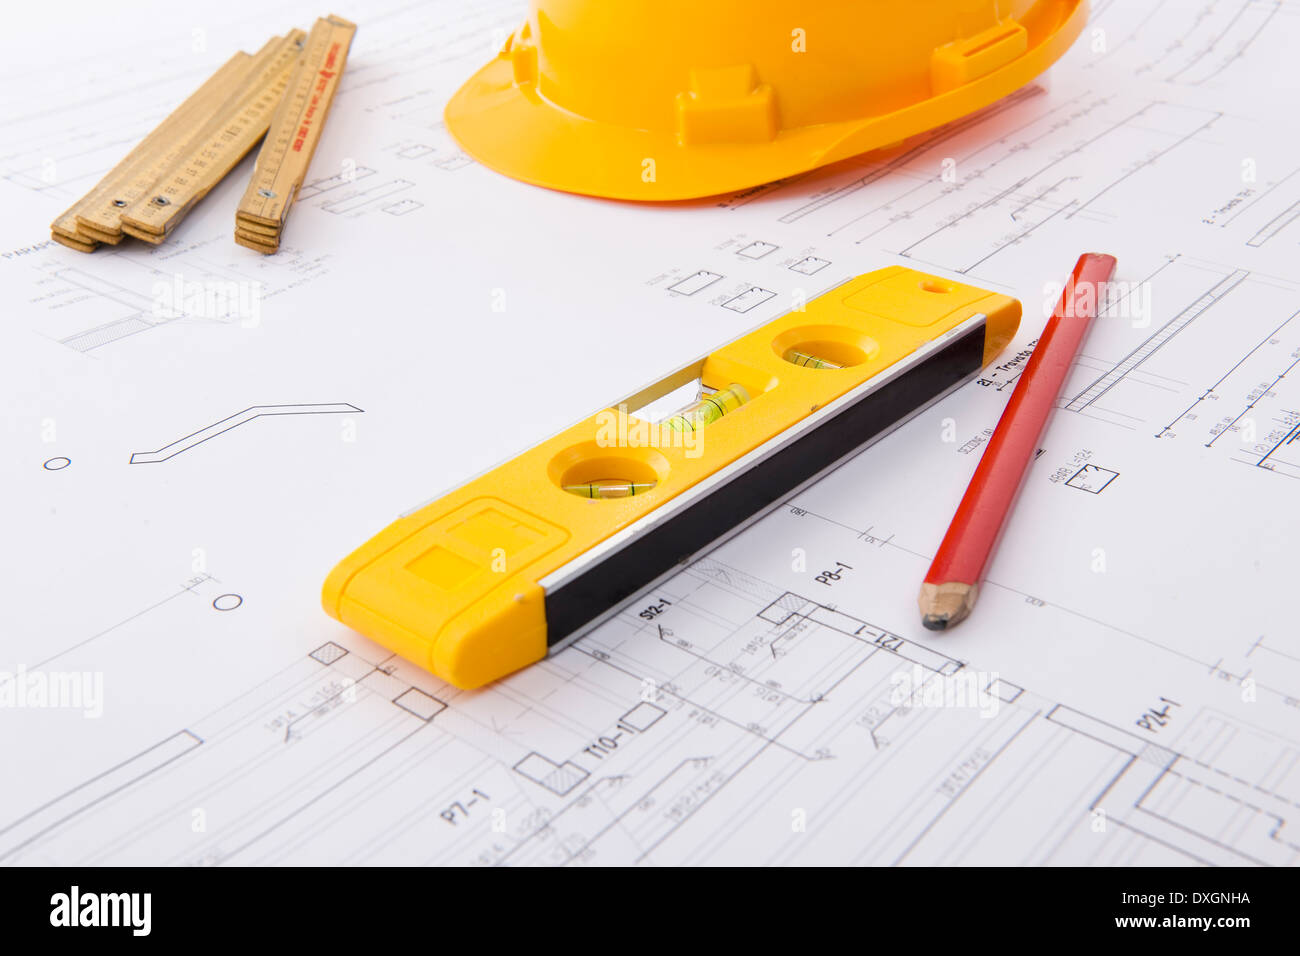 Hard hat and tools on a blueprint Stock Photo